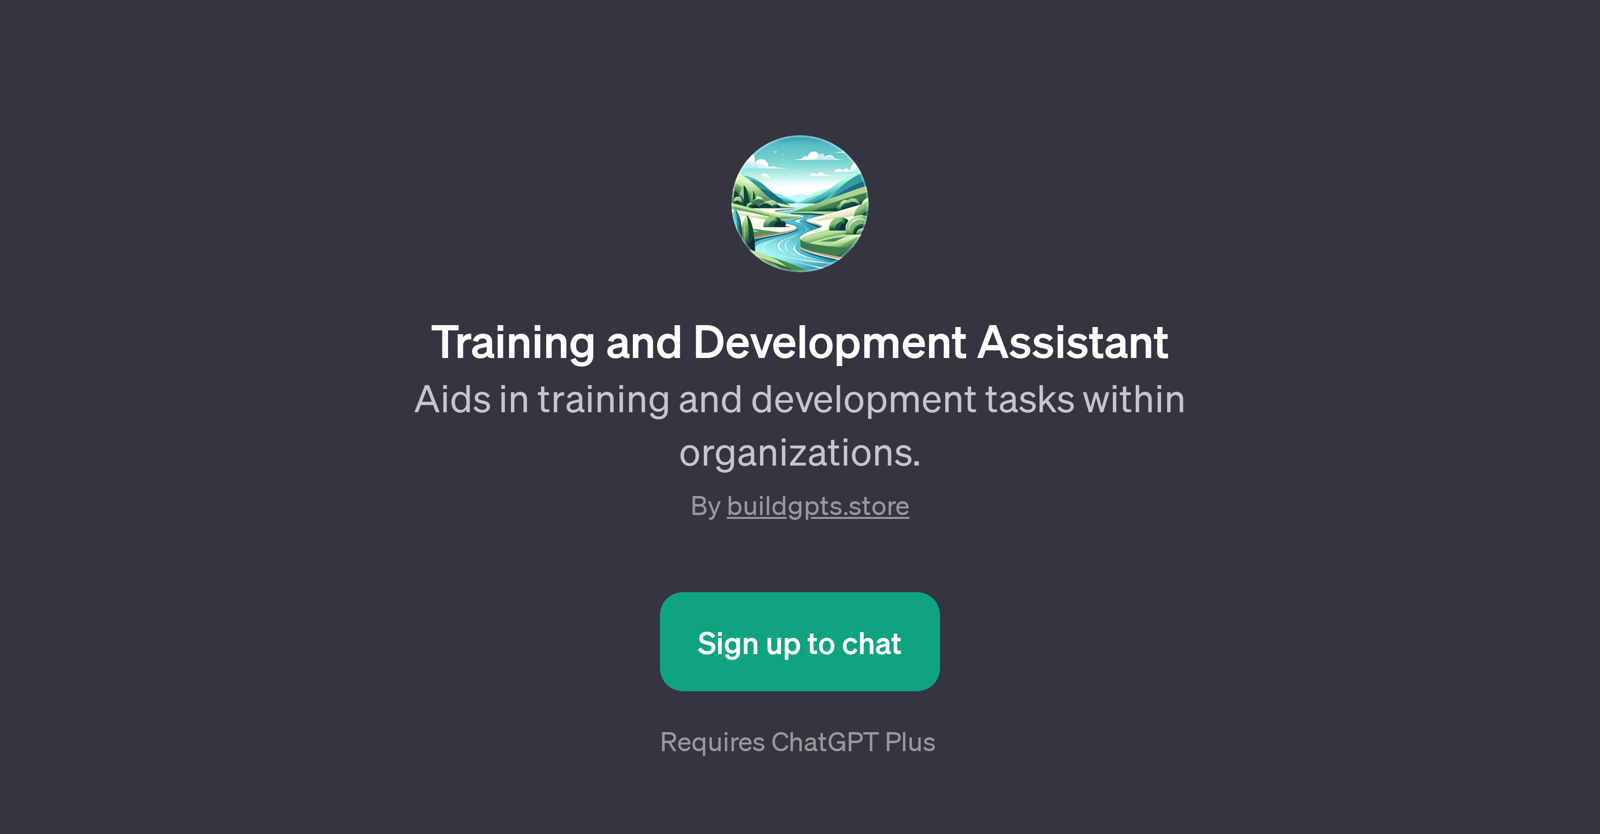 Training and Development Assistant website